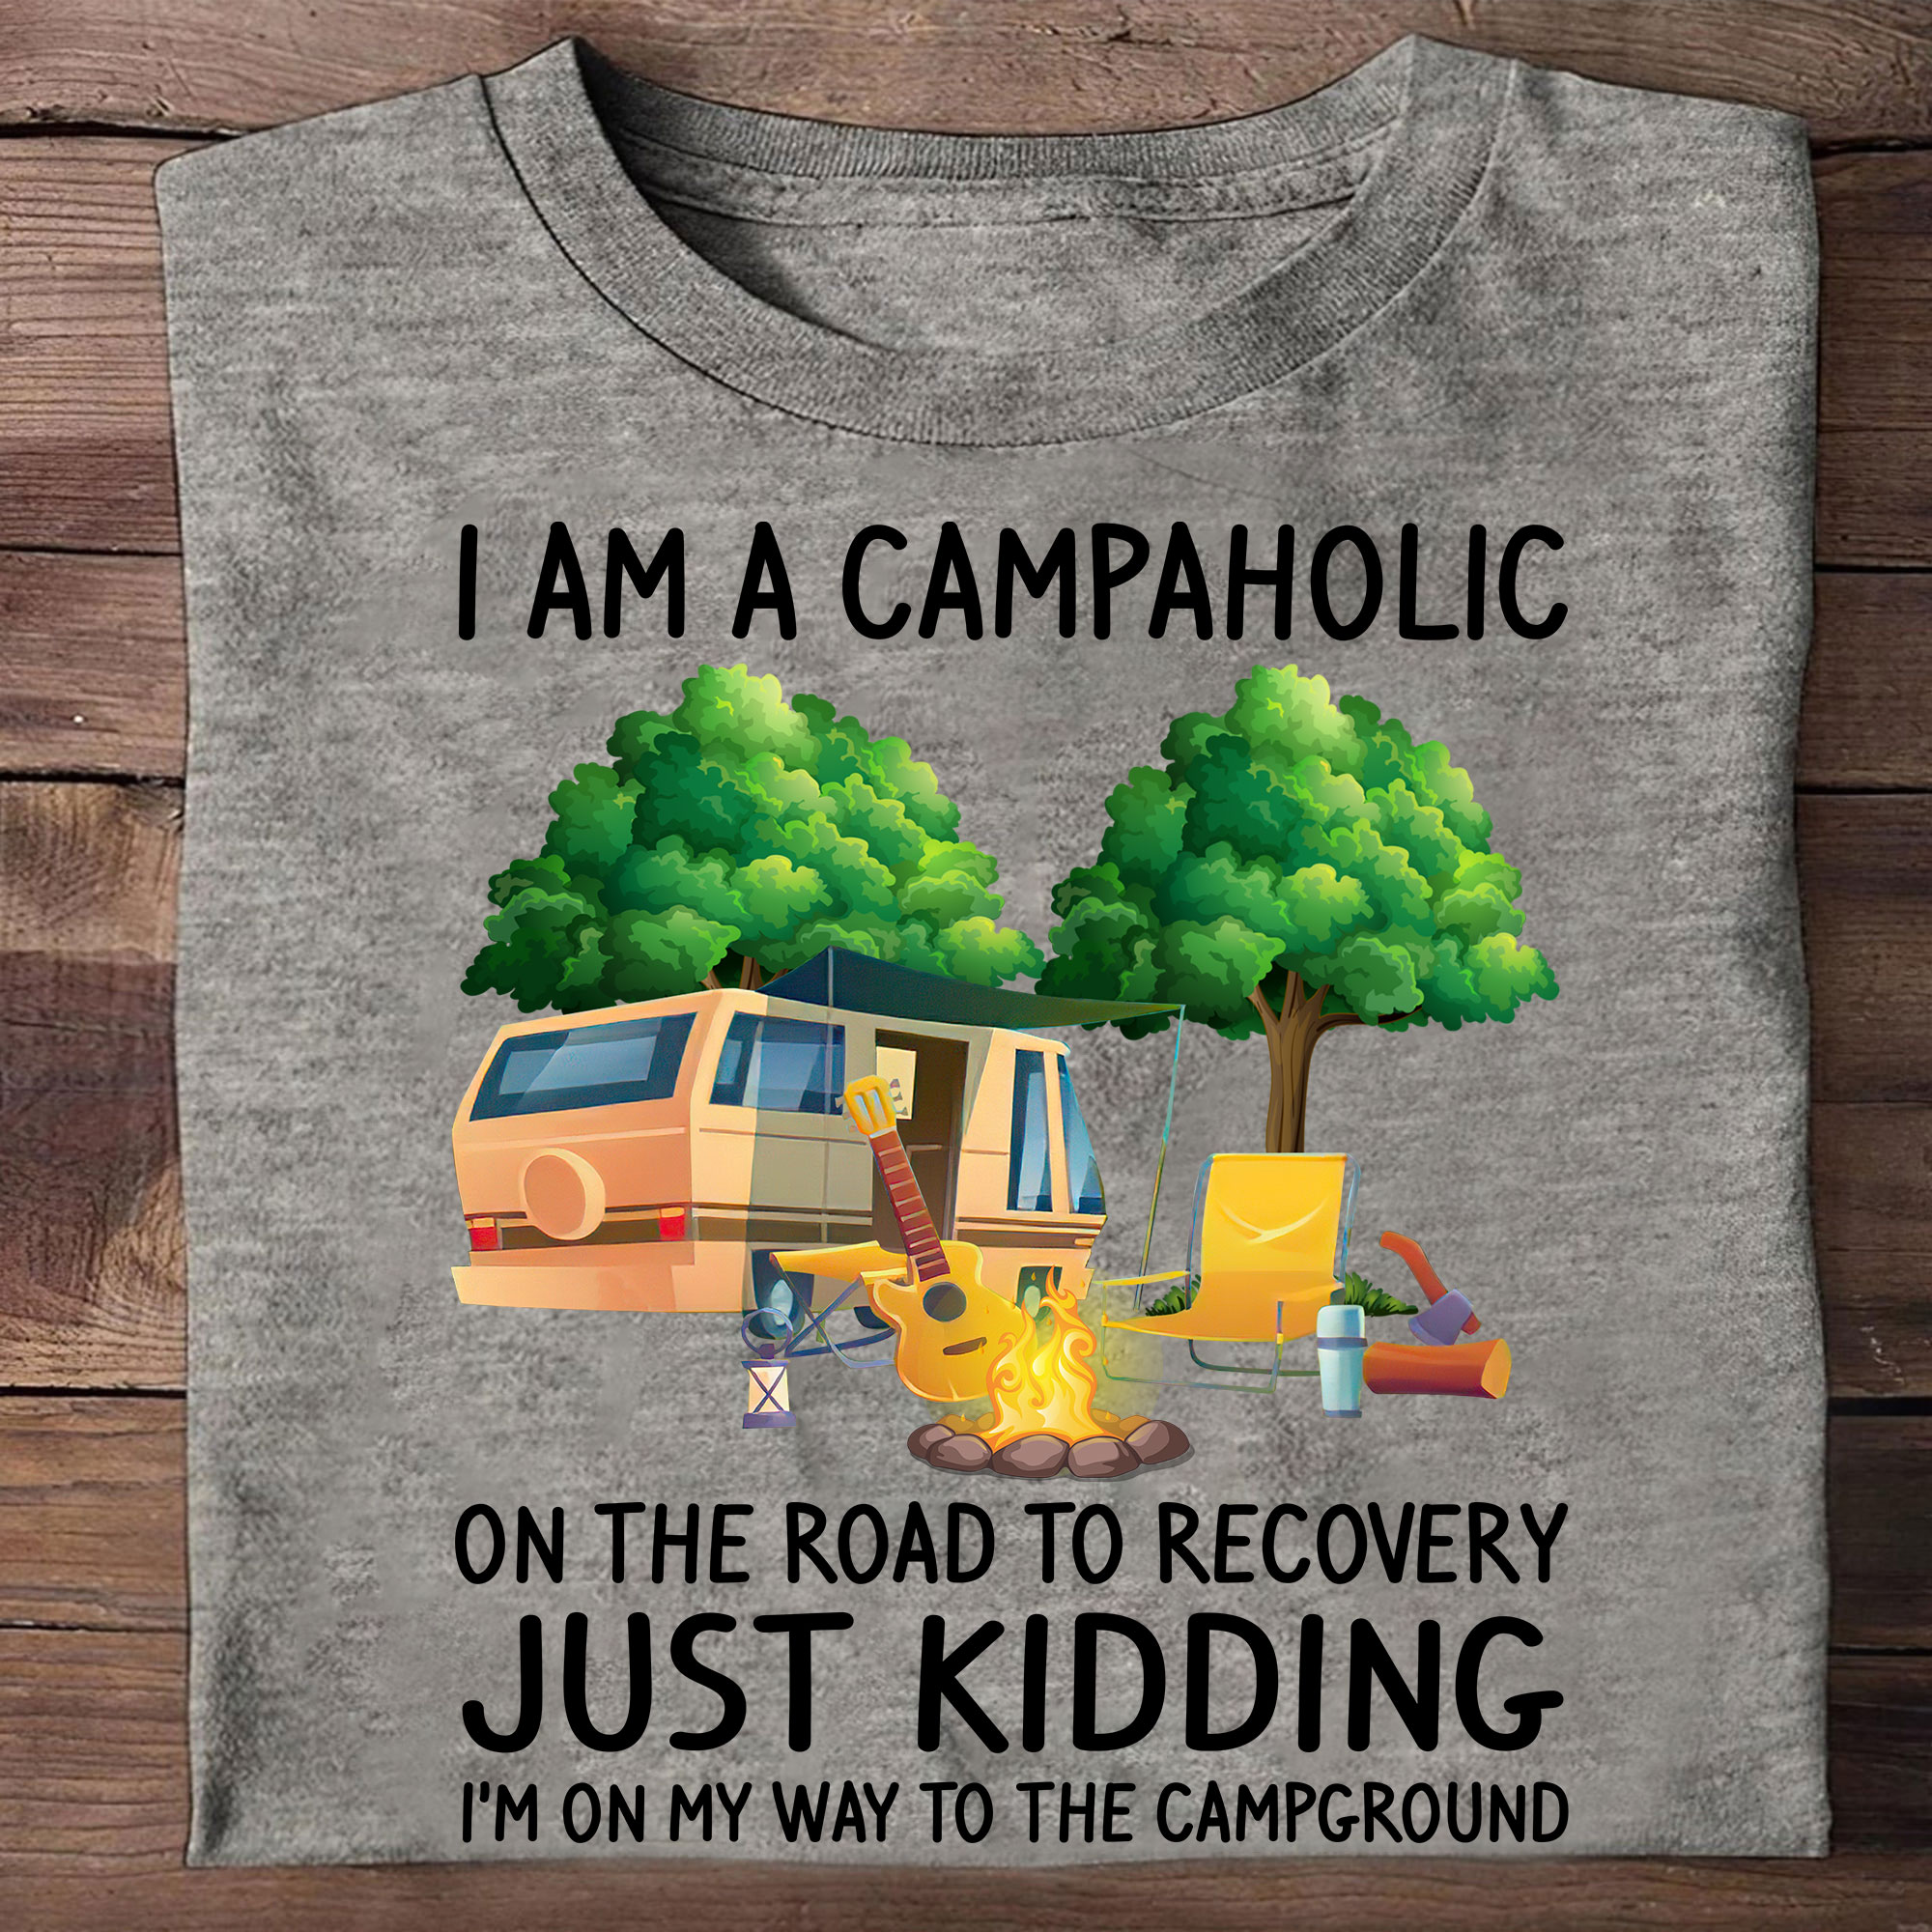 I am a campaholic on the road to recovery just kidding I'm on my way to the campground